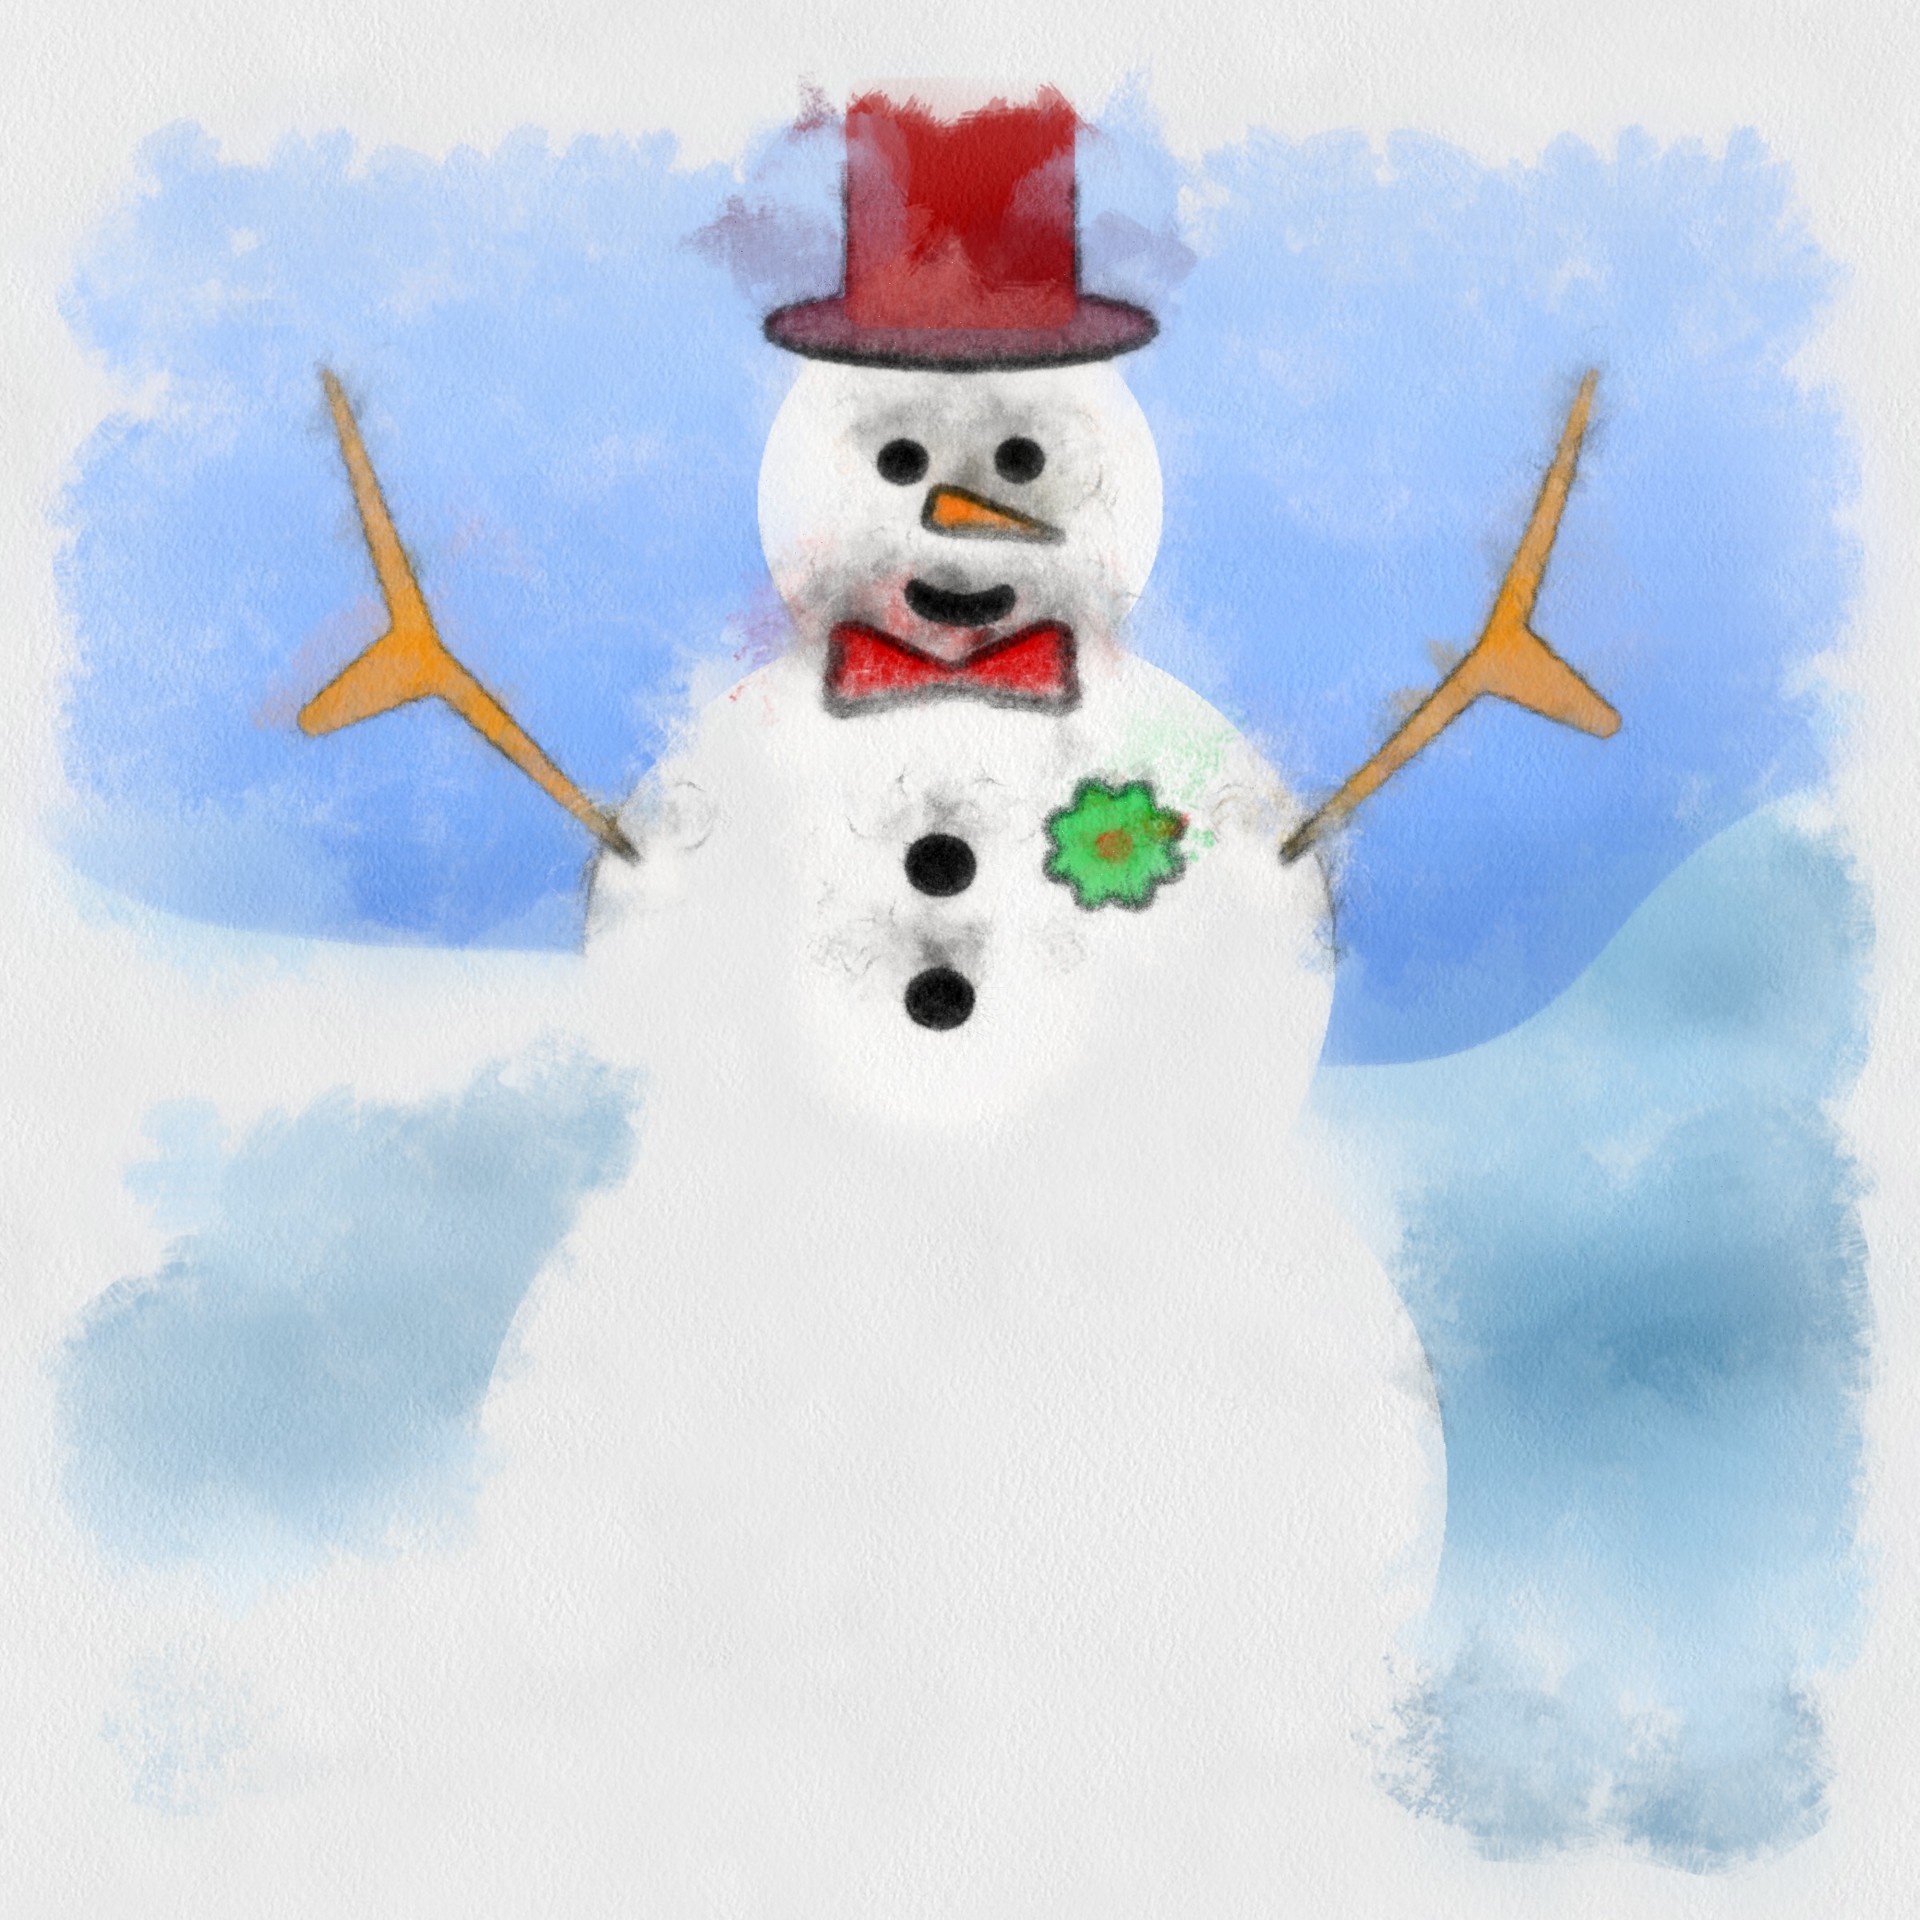 painting snowman isolated free photo